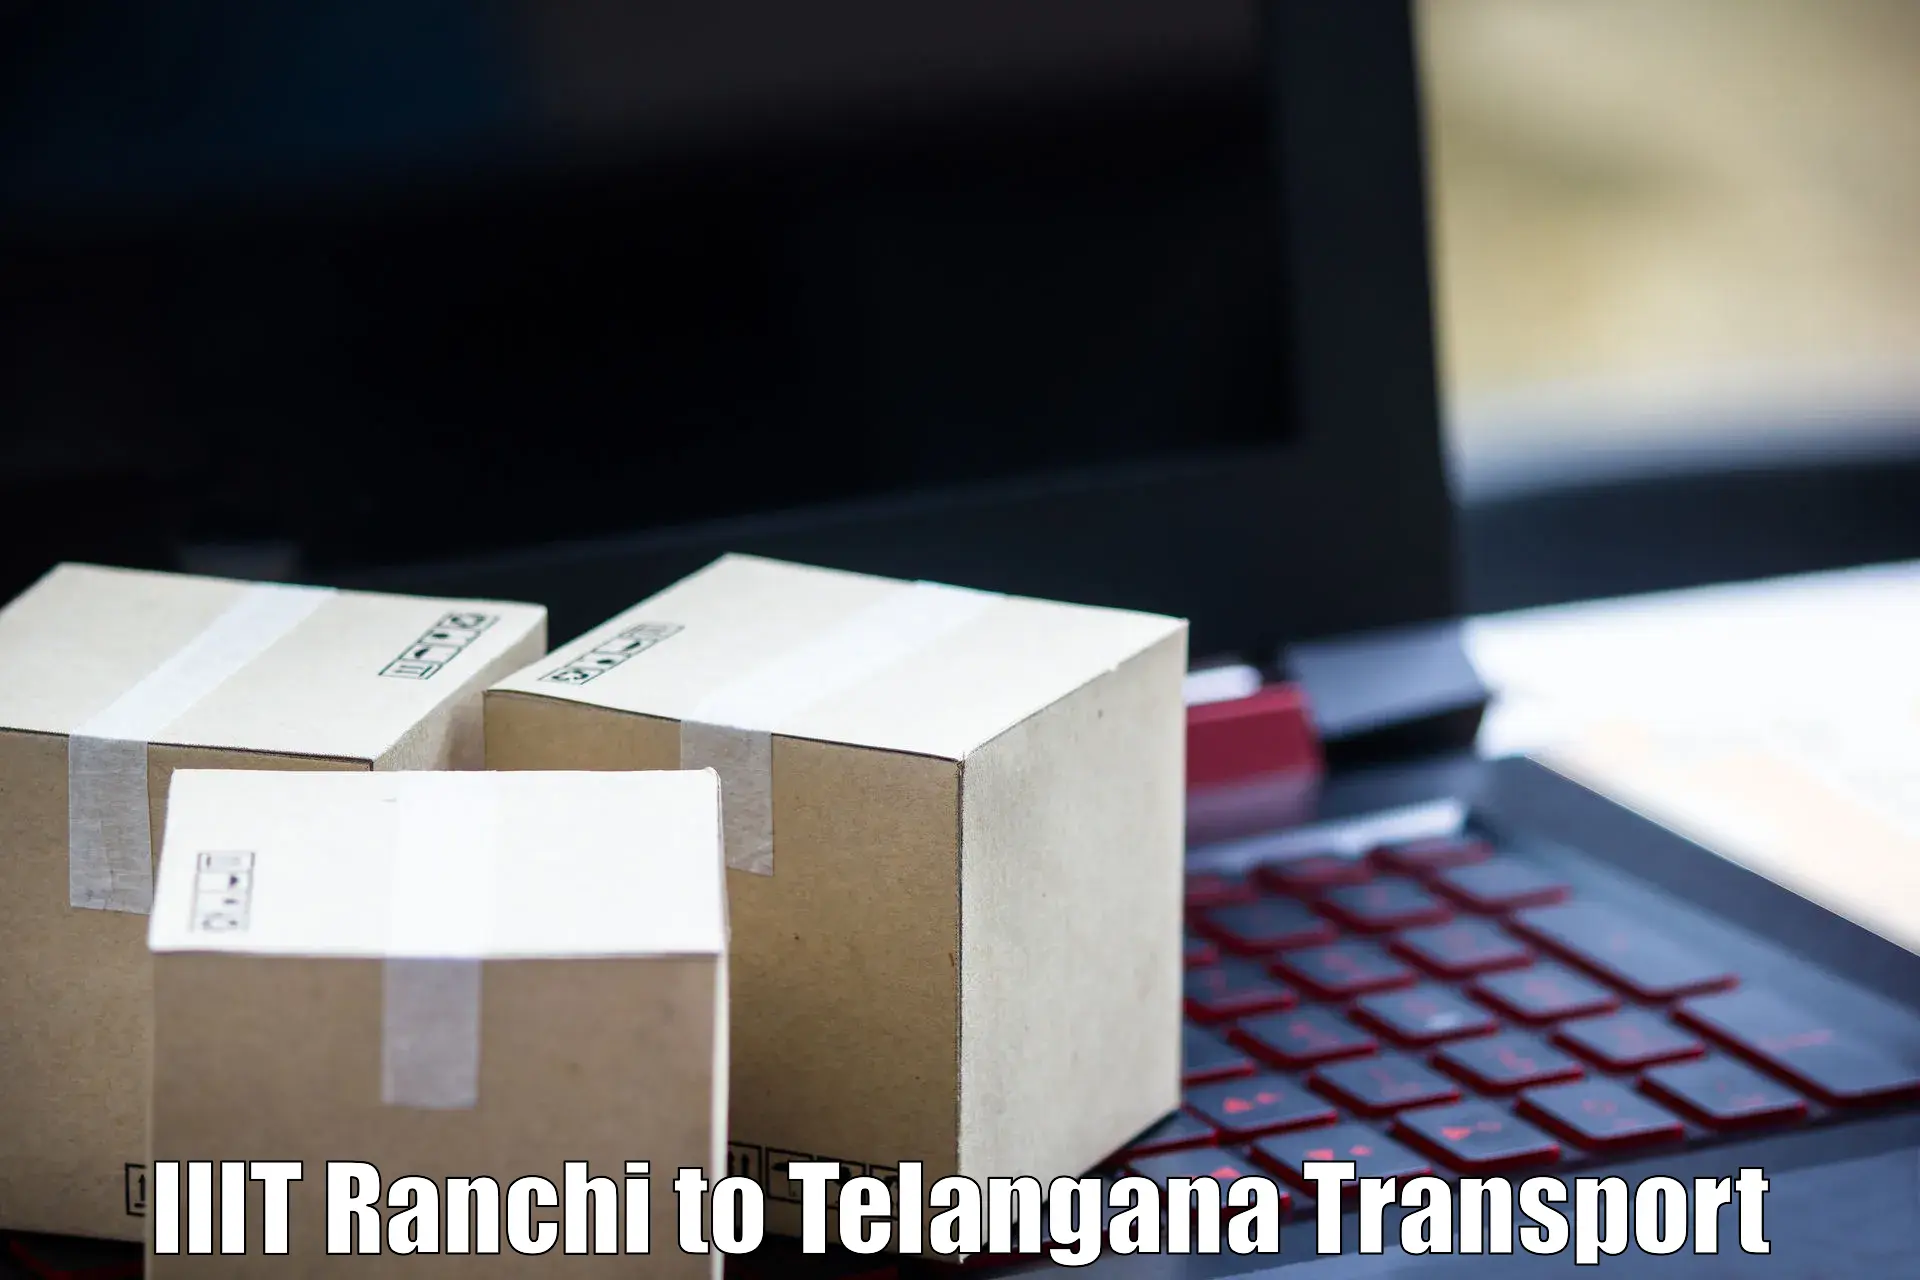 Commercial transport service IIIT Ranchi to Chevella